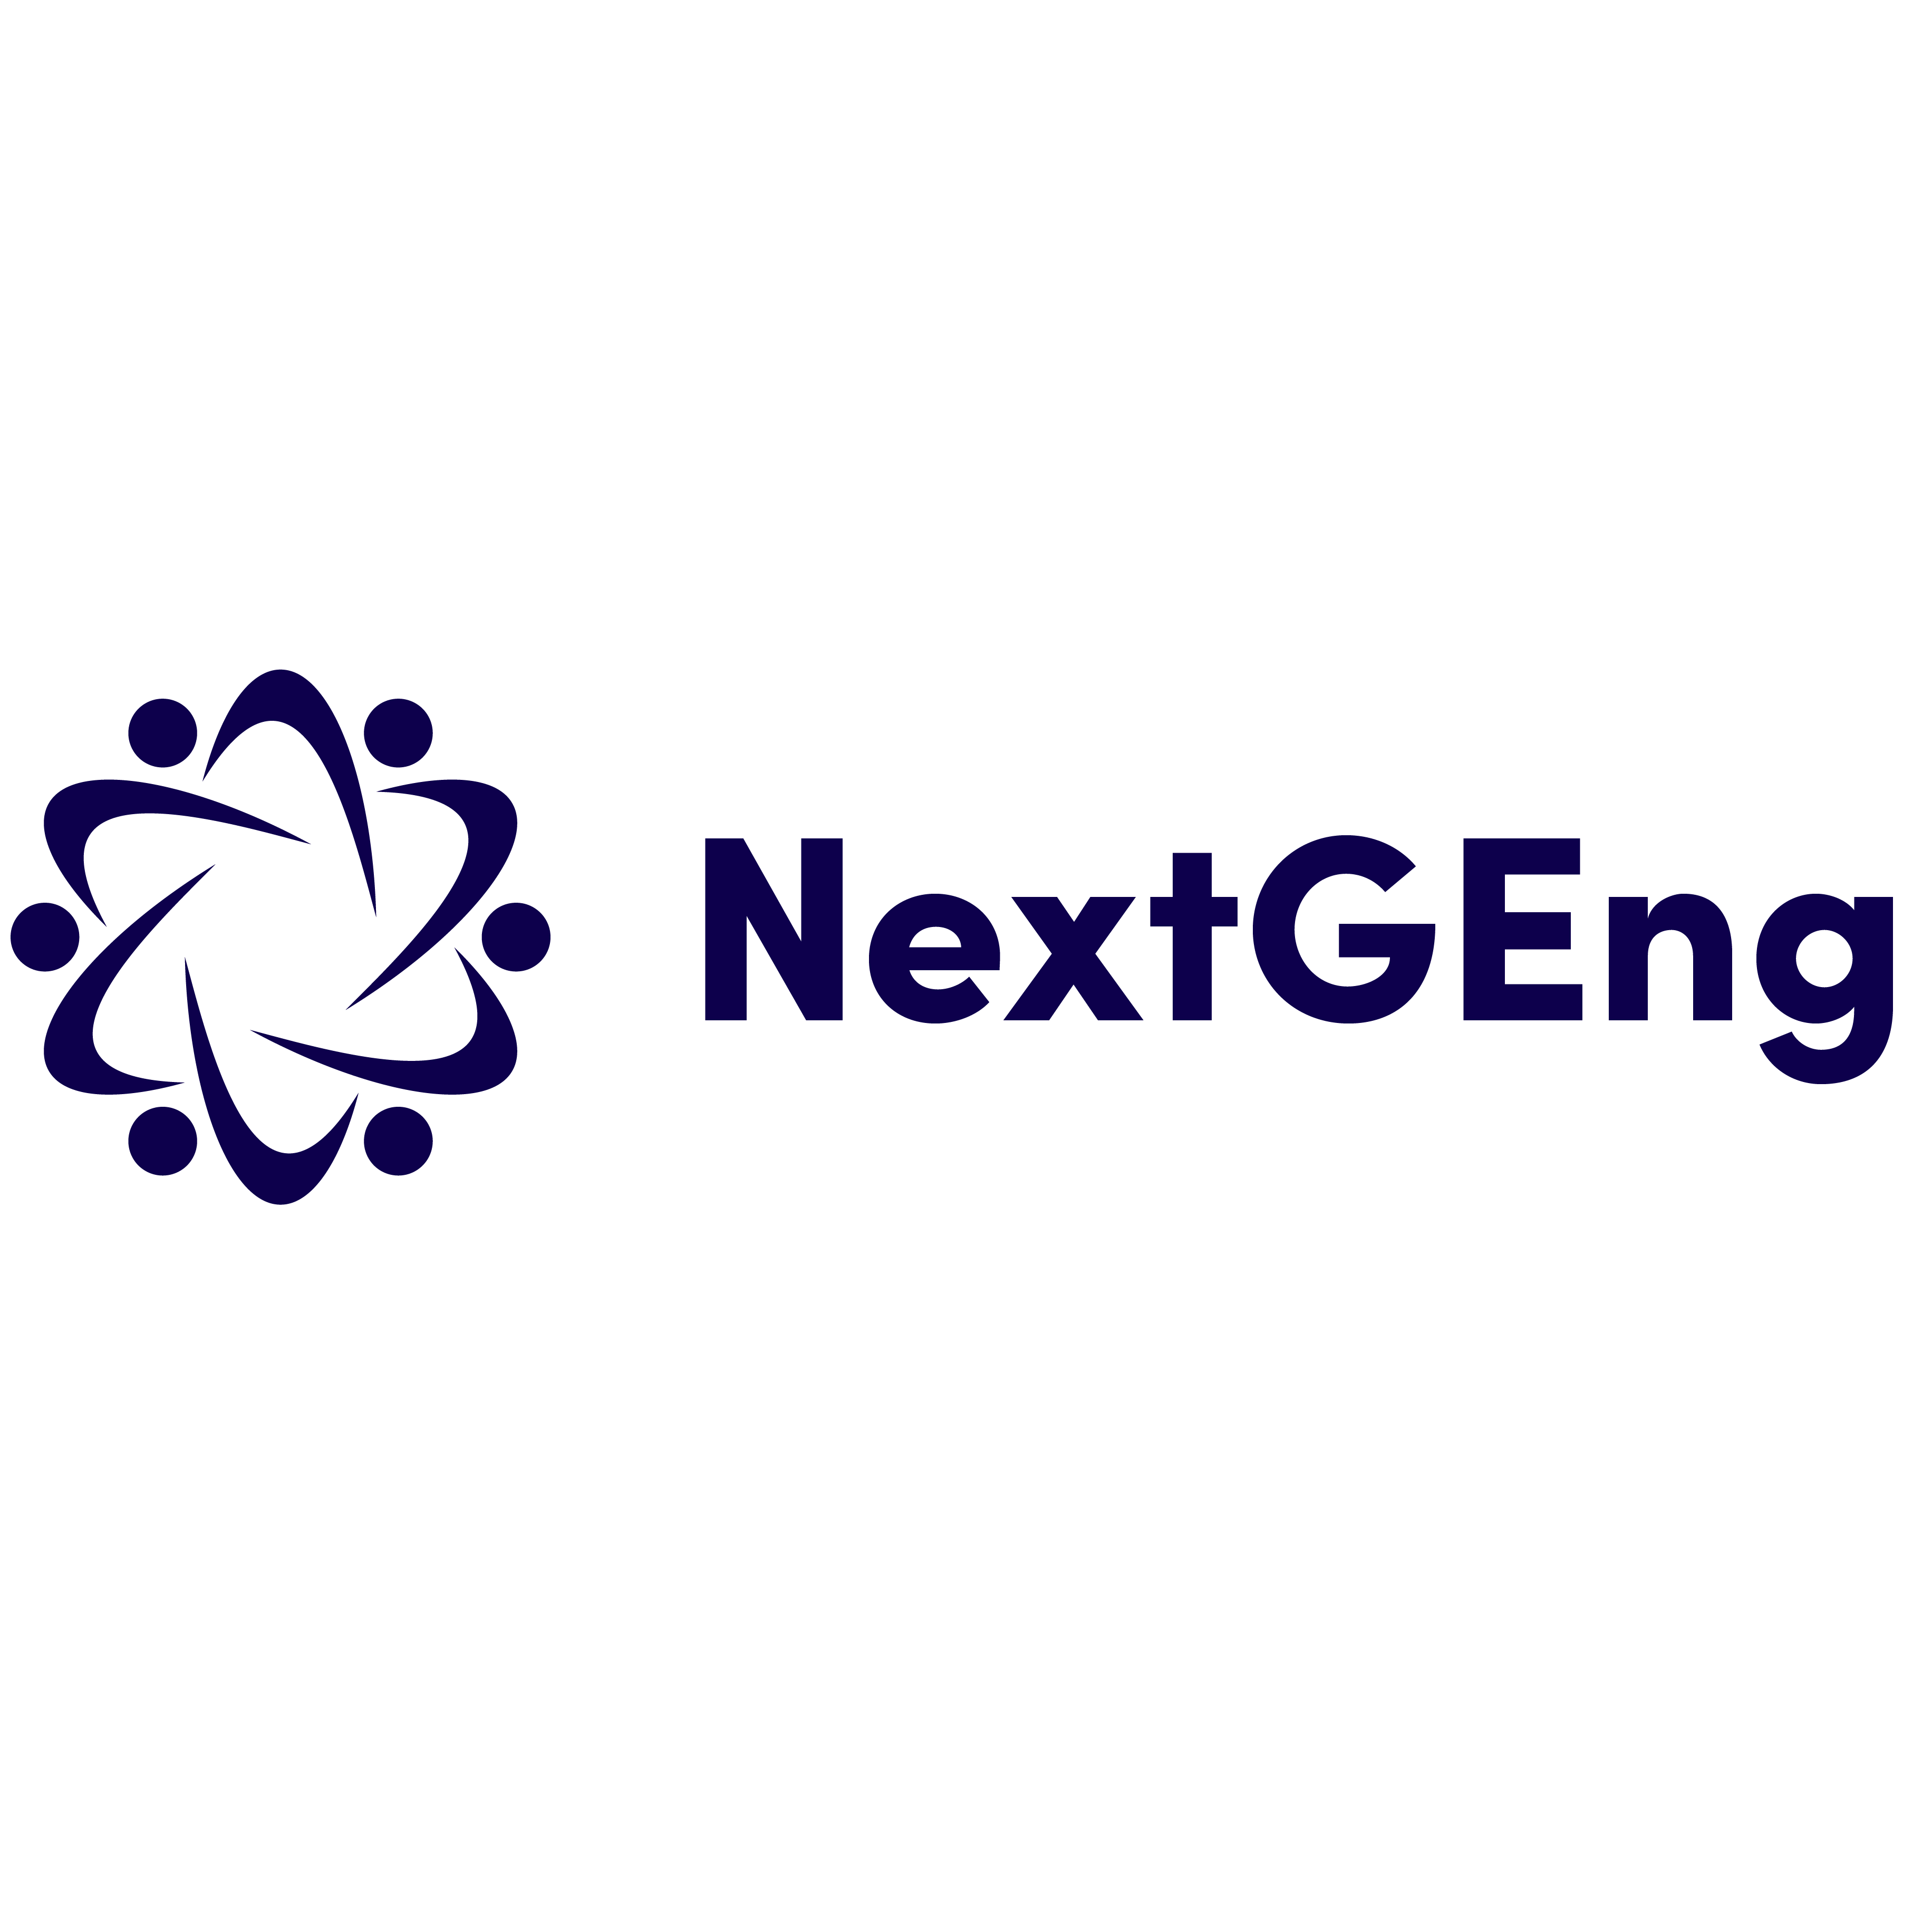 https://www.ifme2022.com/wp-content/uploads/2022/11/NextGEng-logo-with-text-blue-2.png